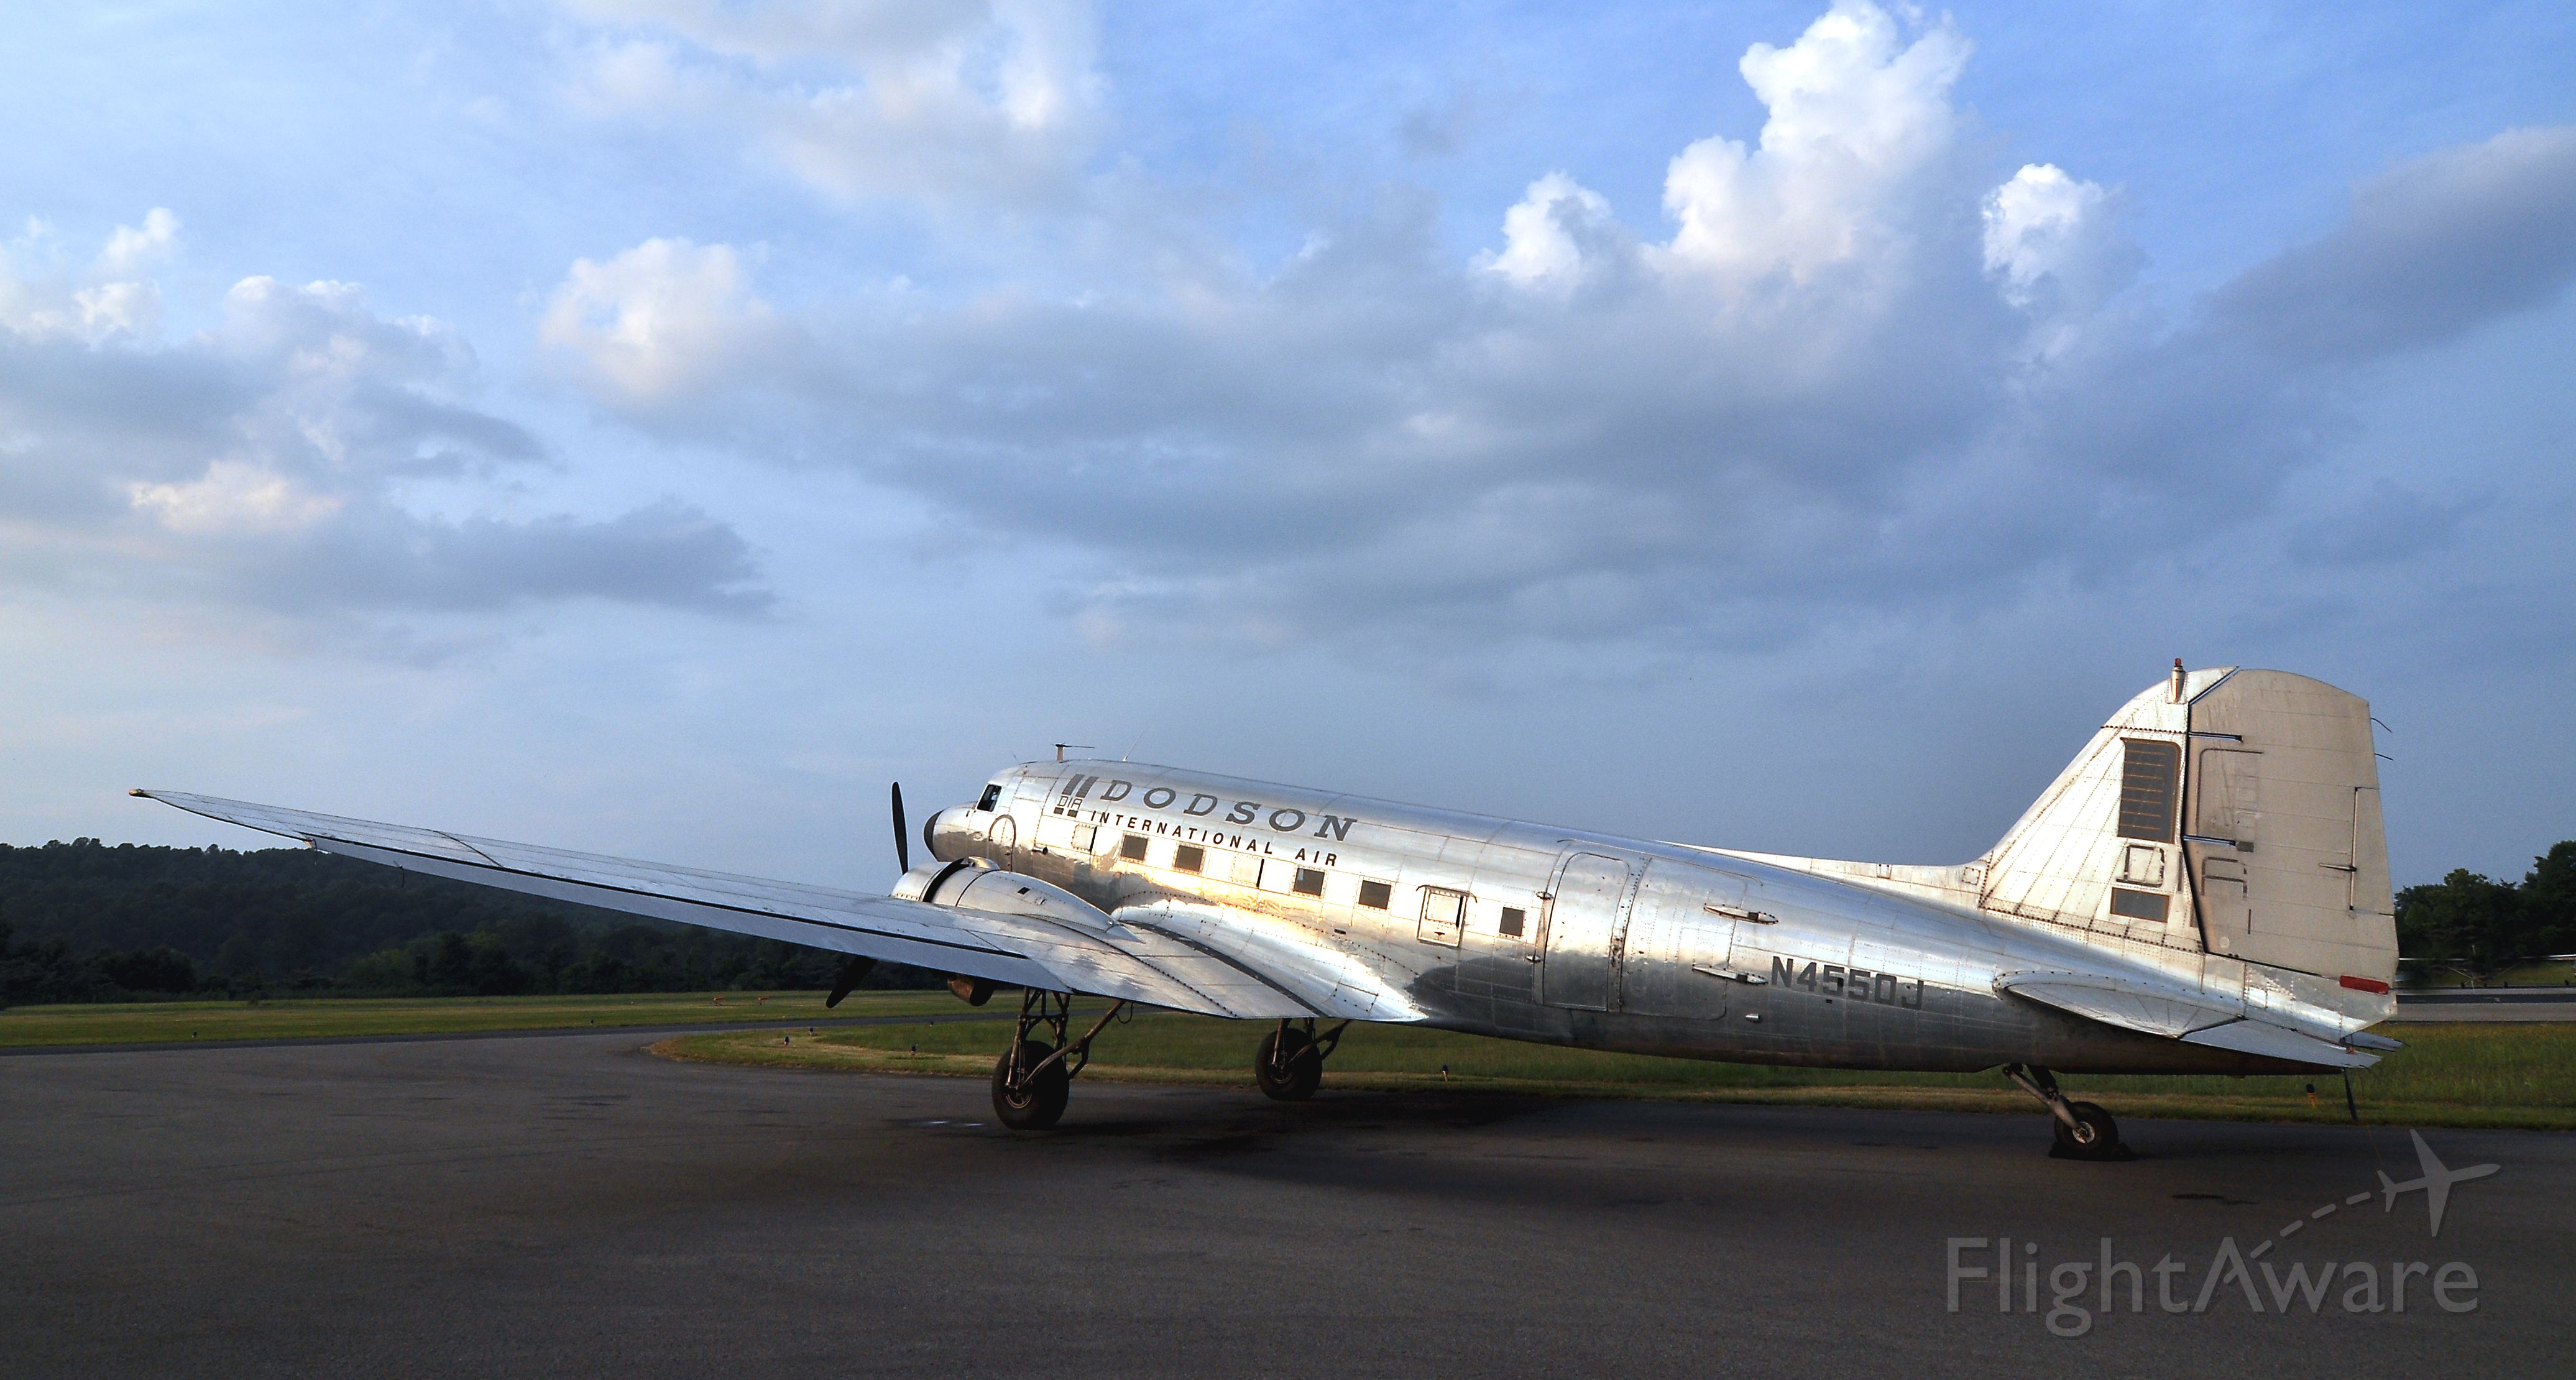 Douglas DC-3 (N4550J) - Late evening sunlight reflecting from the plane, and a pretty sky, made me stop and take several photos of it.  This is on the DKX ramp near the fuel pumps.